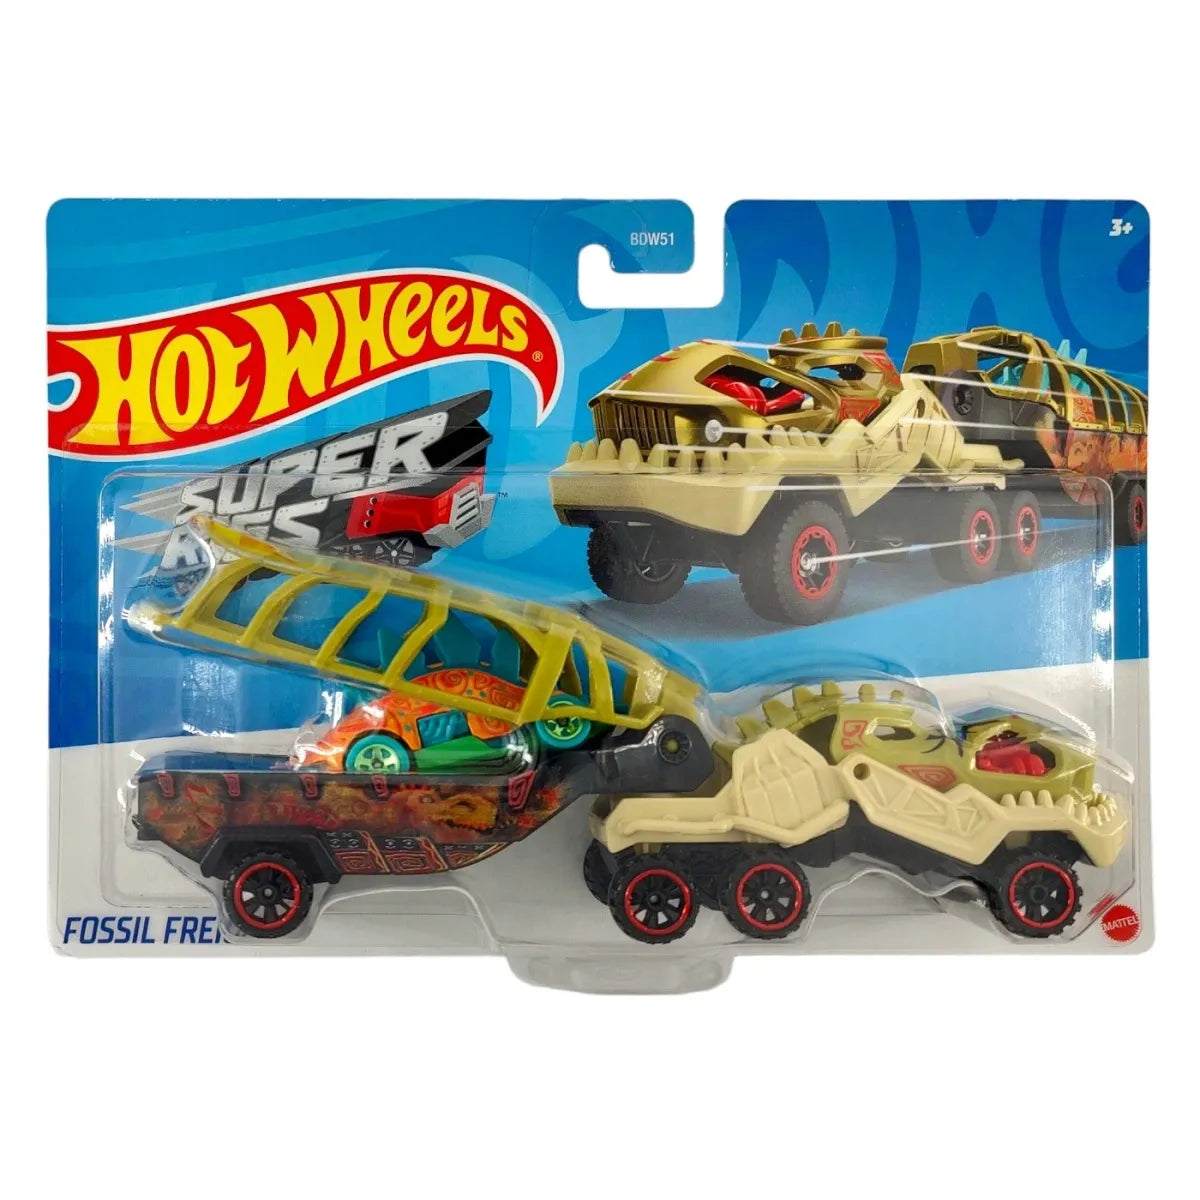 Green Fossil Freight Rig by Hot Wheels -Hot Wheels - India - www.superherotoystore.com